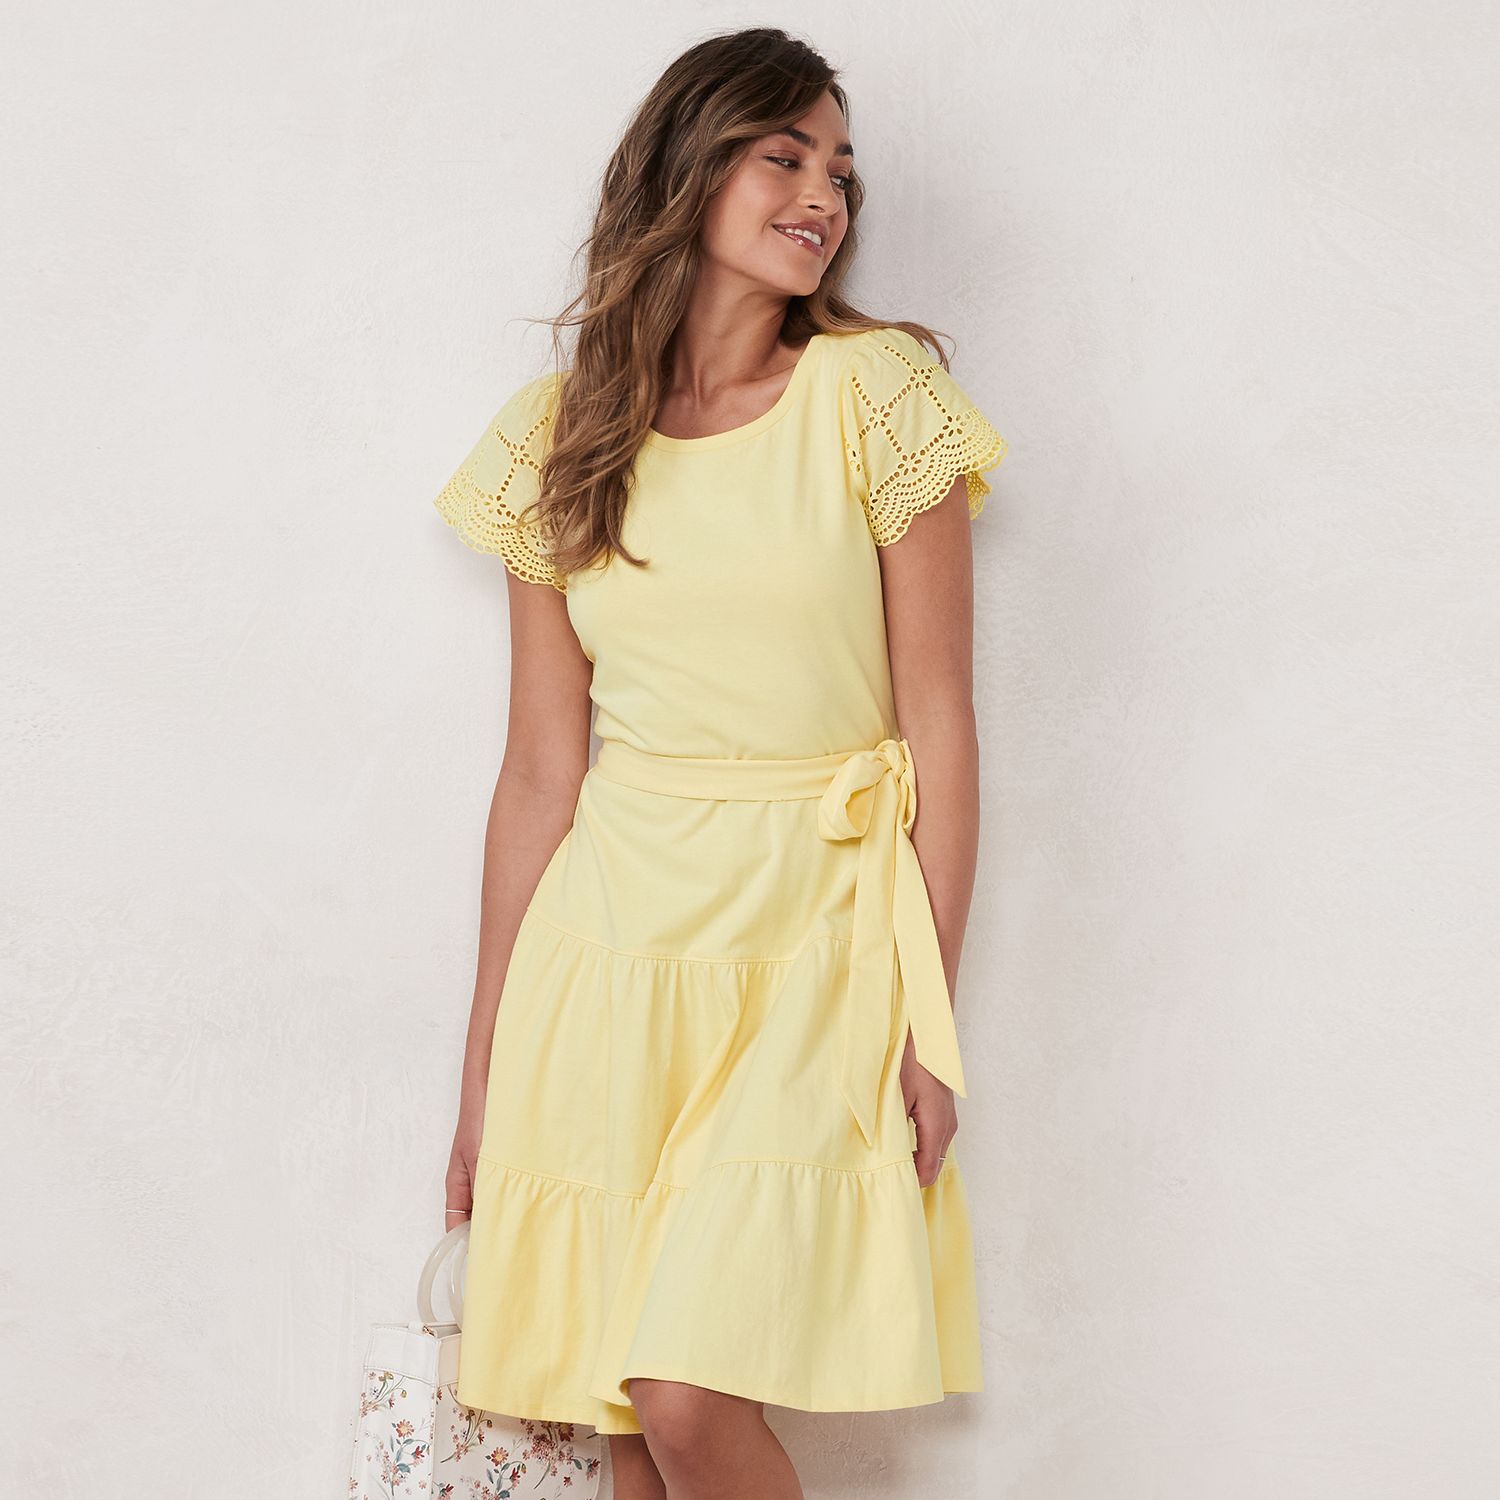 Juniors Easter Dresses: Hop to it and ...